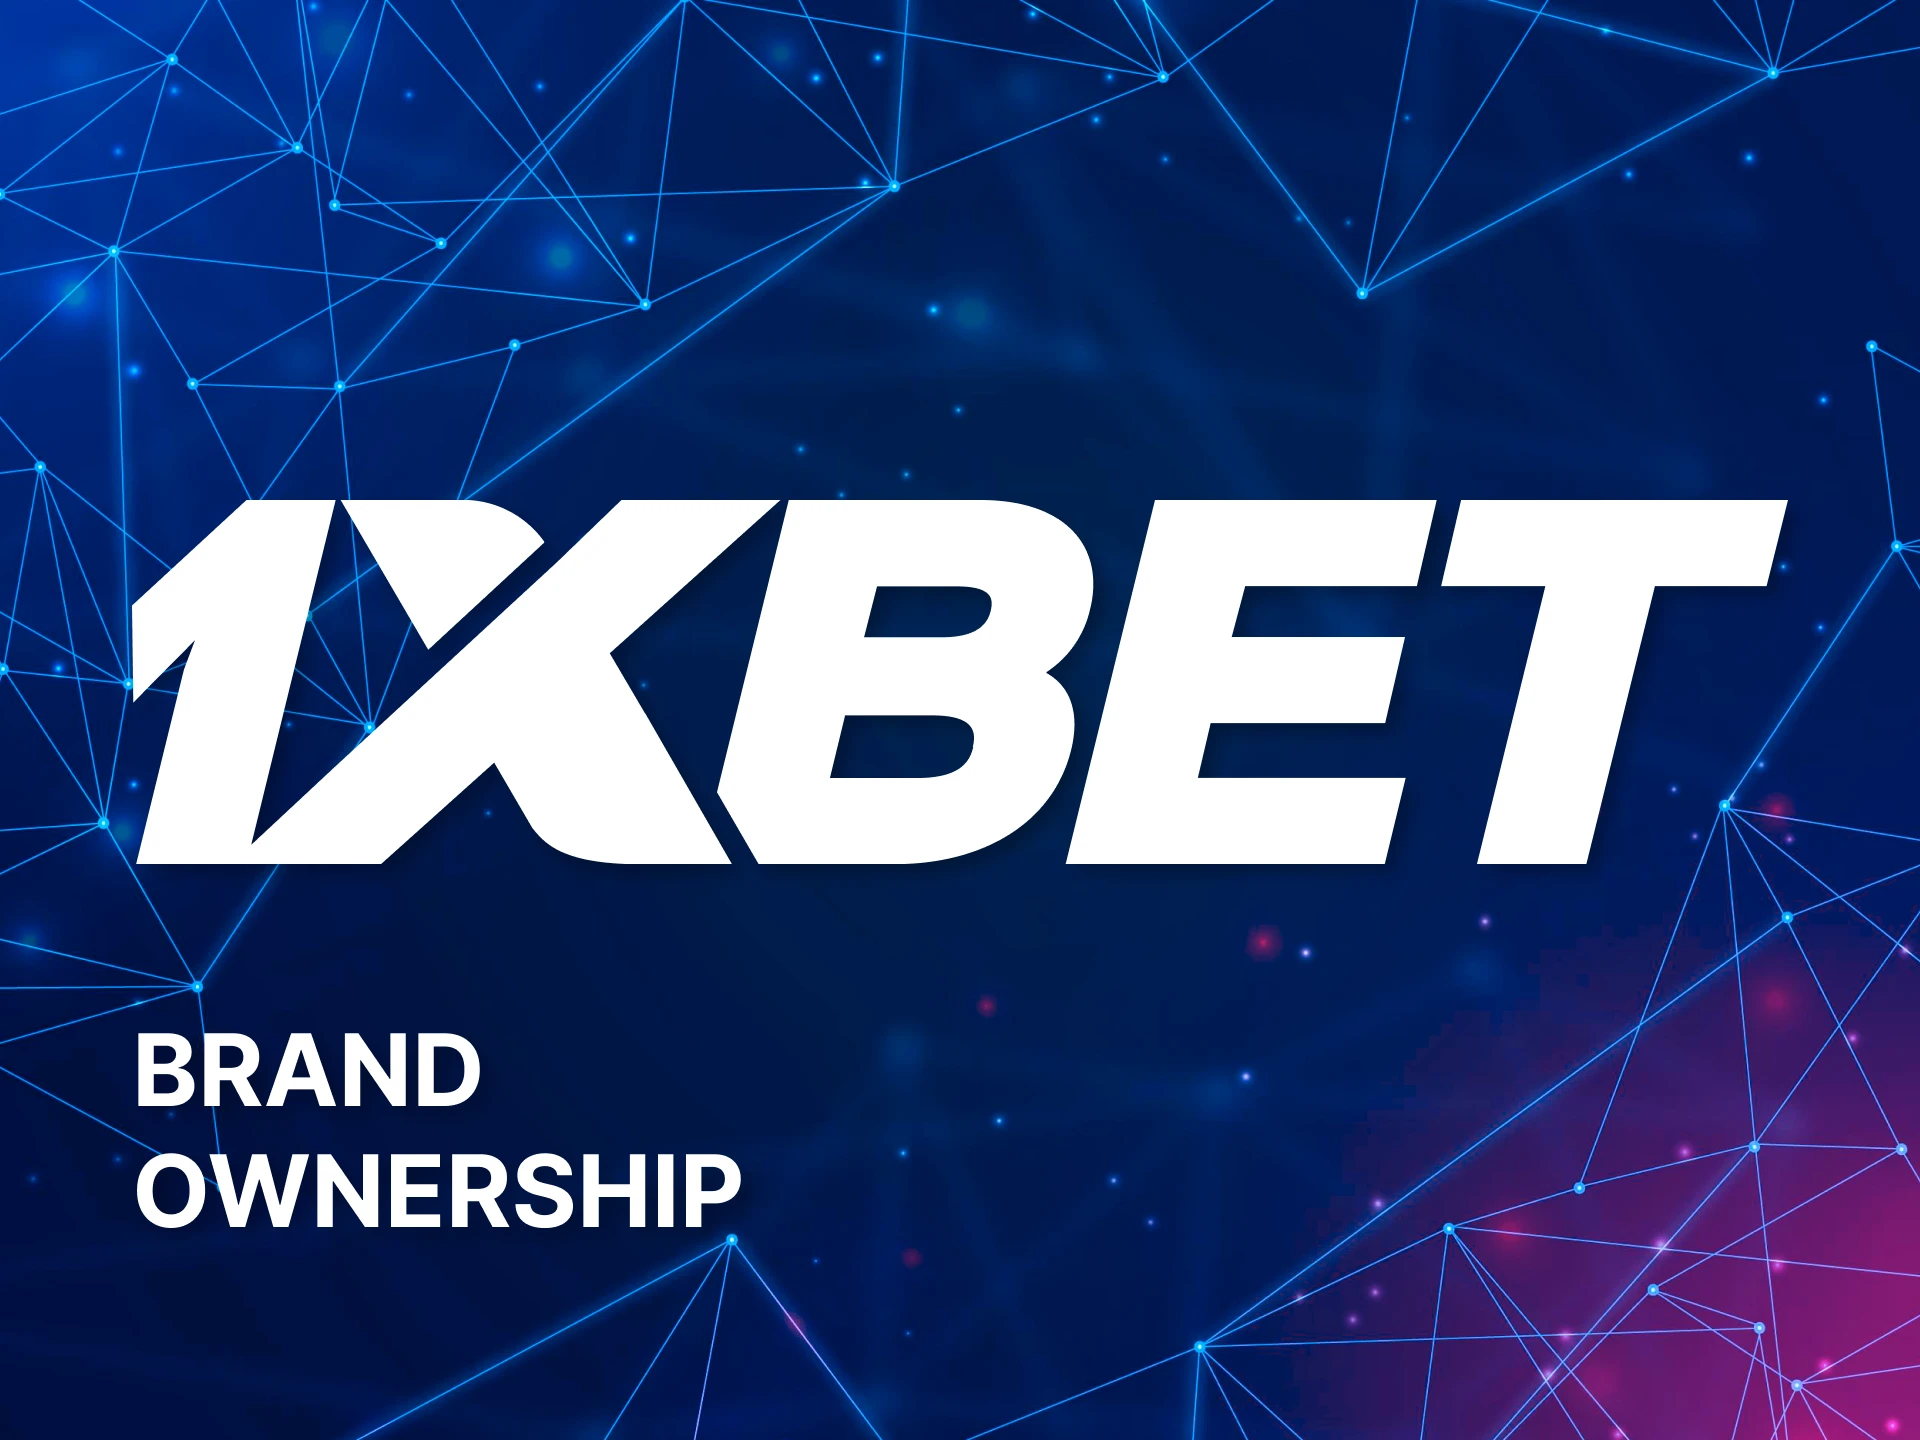 The 1xBet brand cannot be used or changed by anyone other than the company itself.